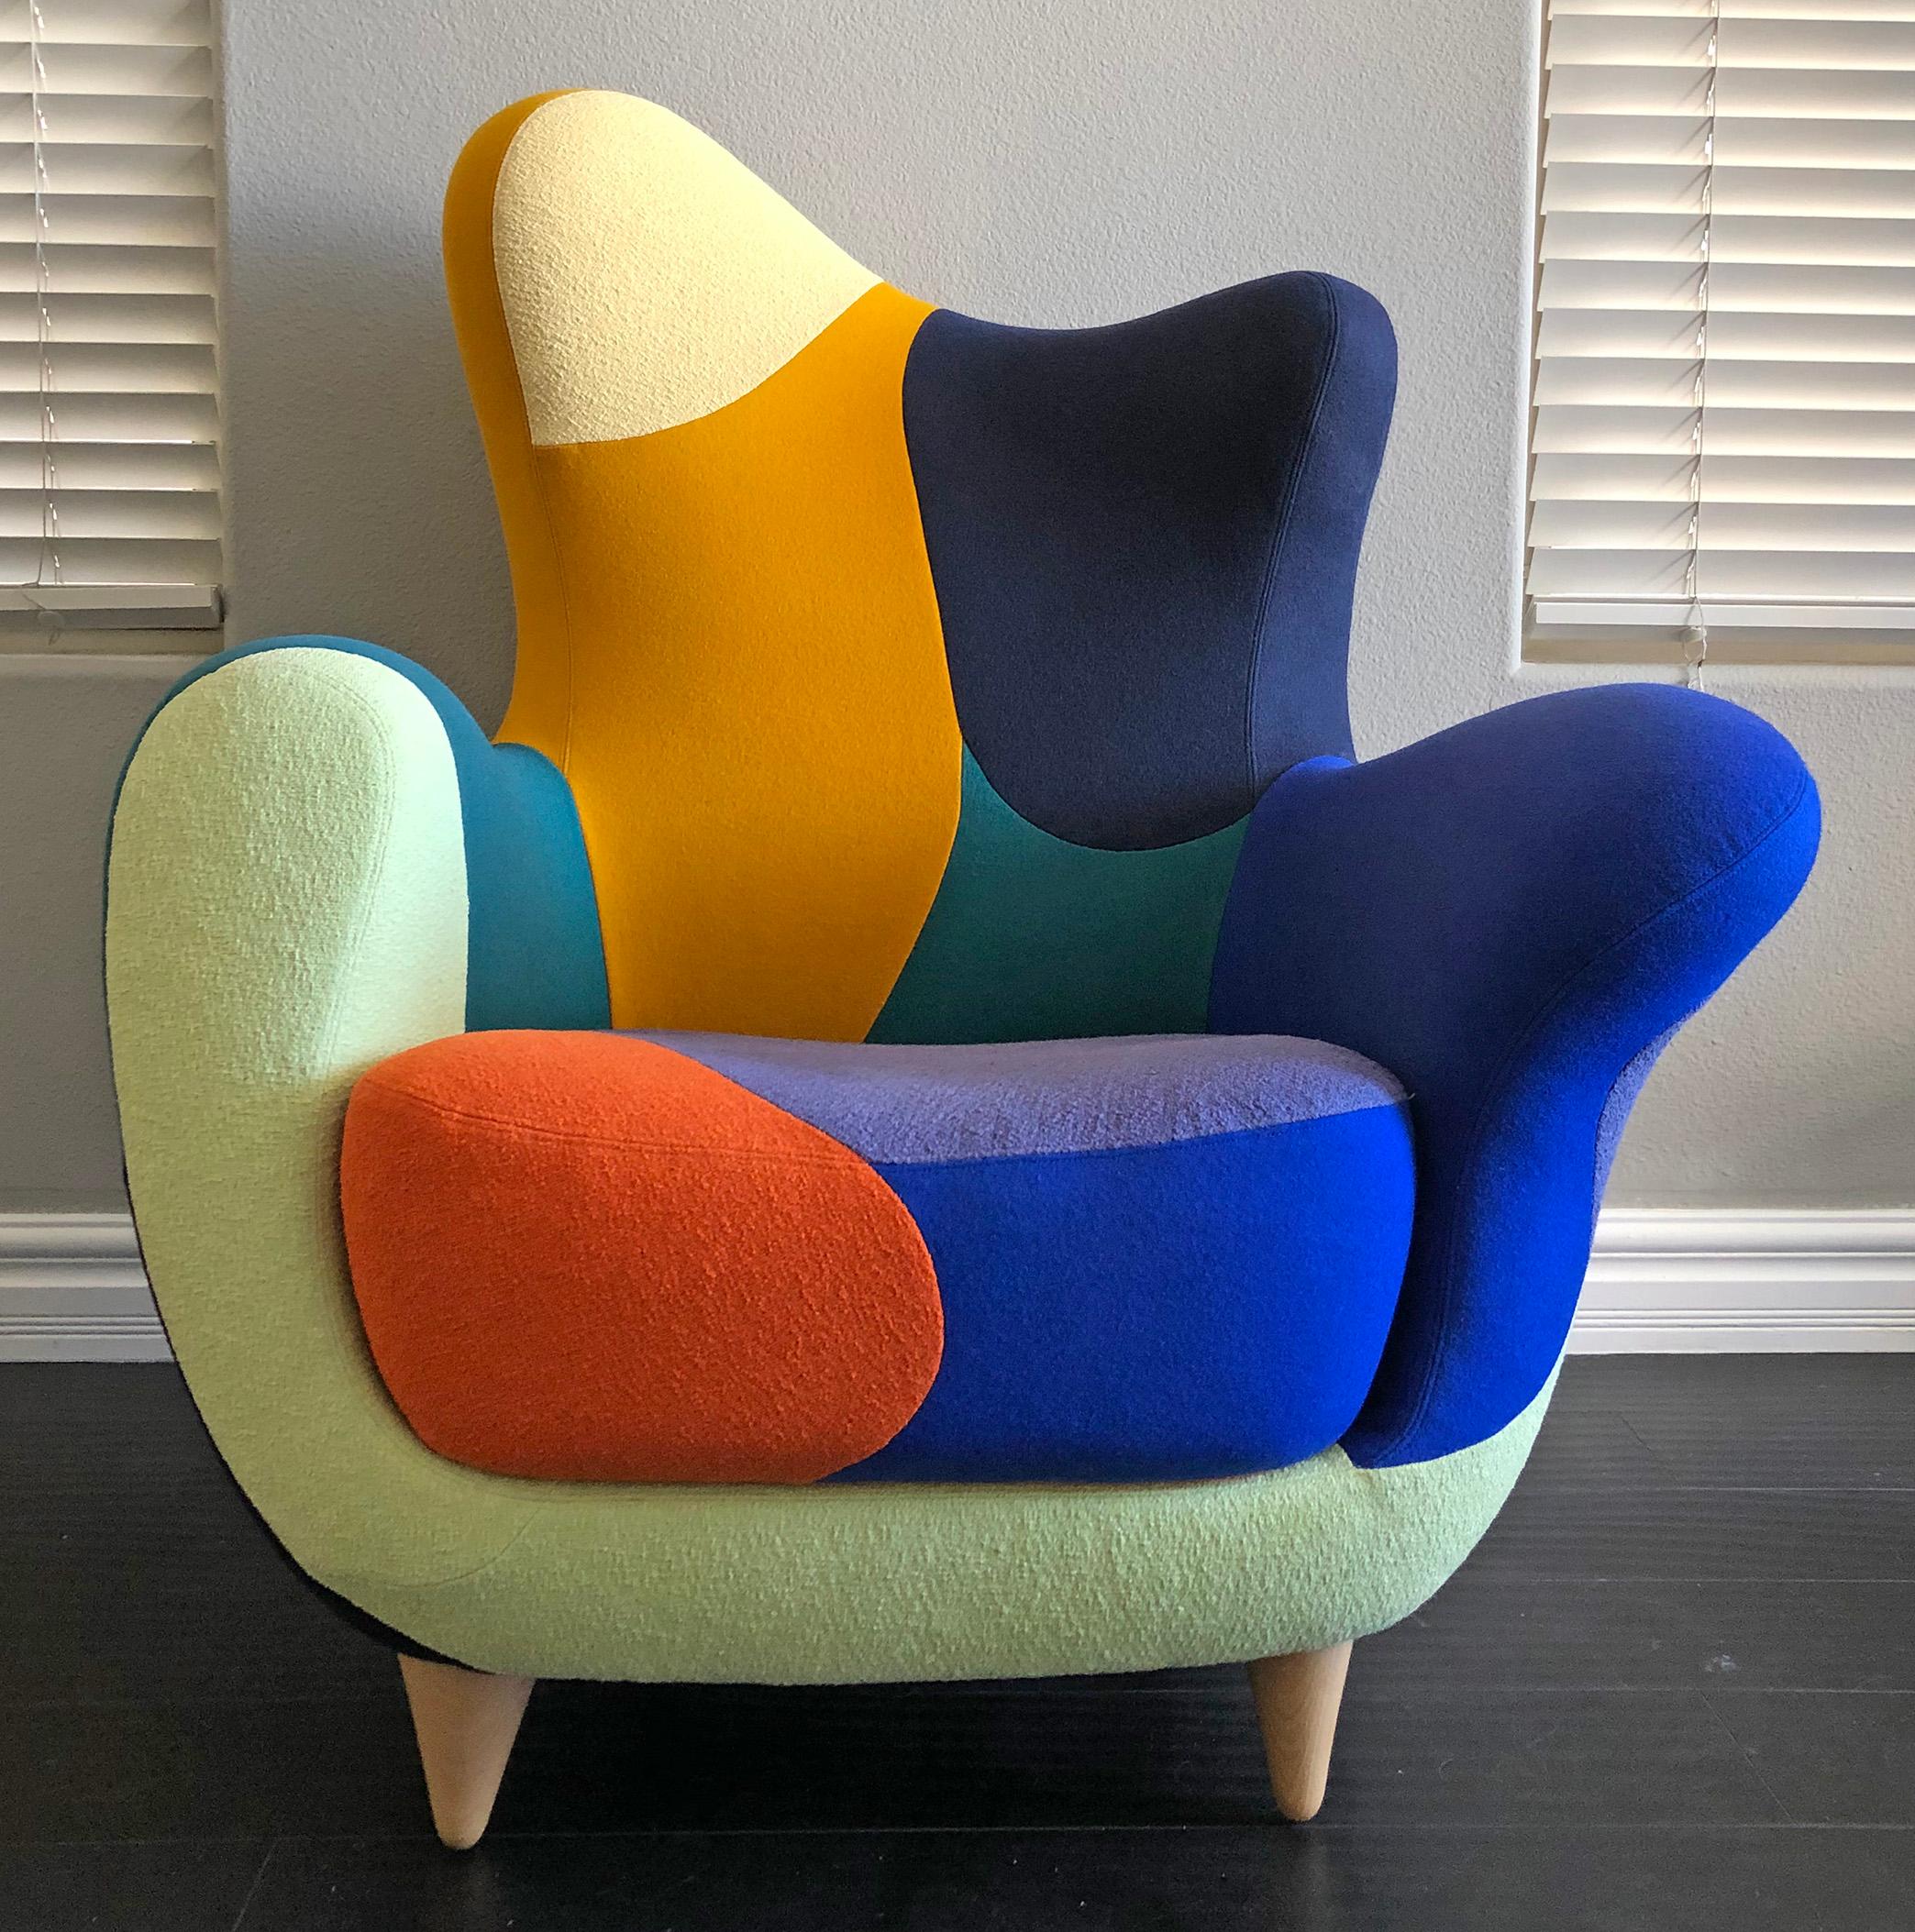 A gorgeous new arrival, this Alessandra armchair / wingback lounge designed by Javier Mariscal for Moroso is an armchair that is part of the collection Los Muebles Amorosos.

With a very Memphis Milano and whimsical feel, this Postmodern lounge